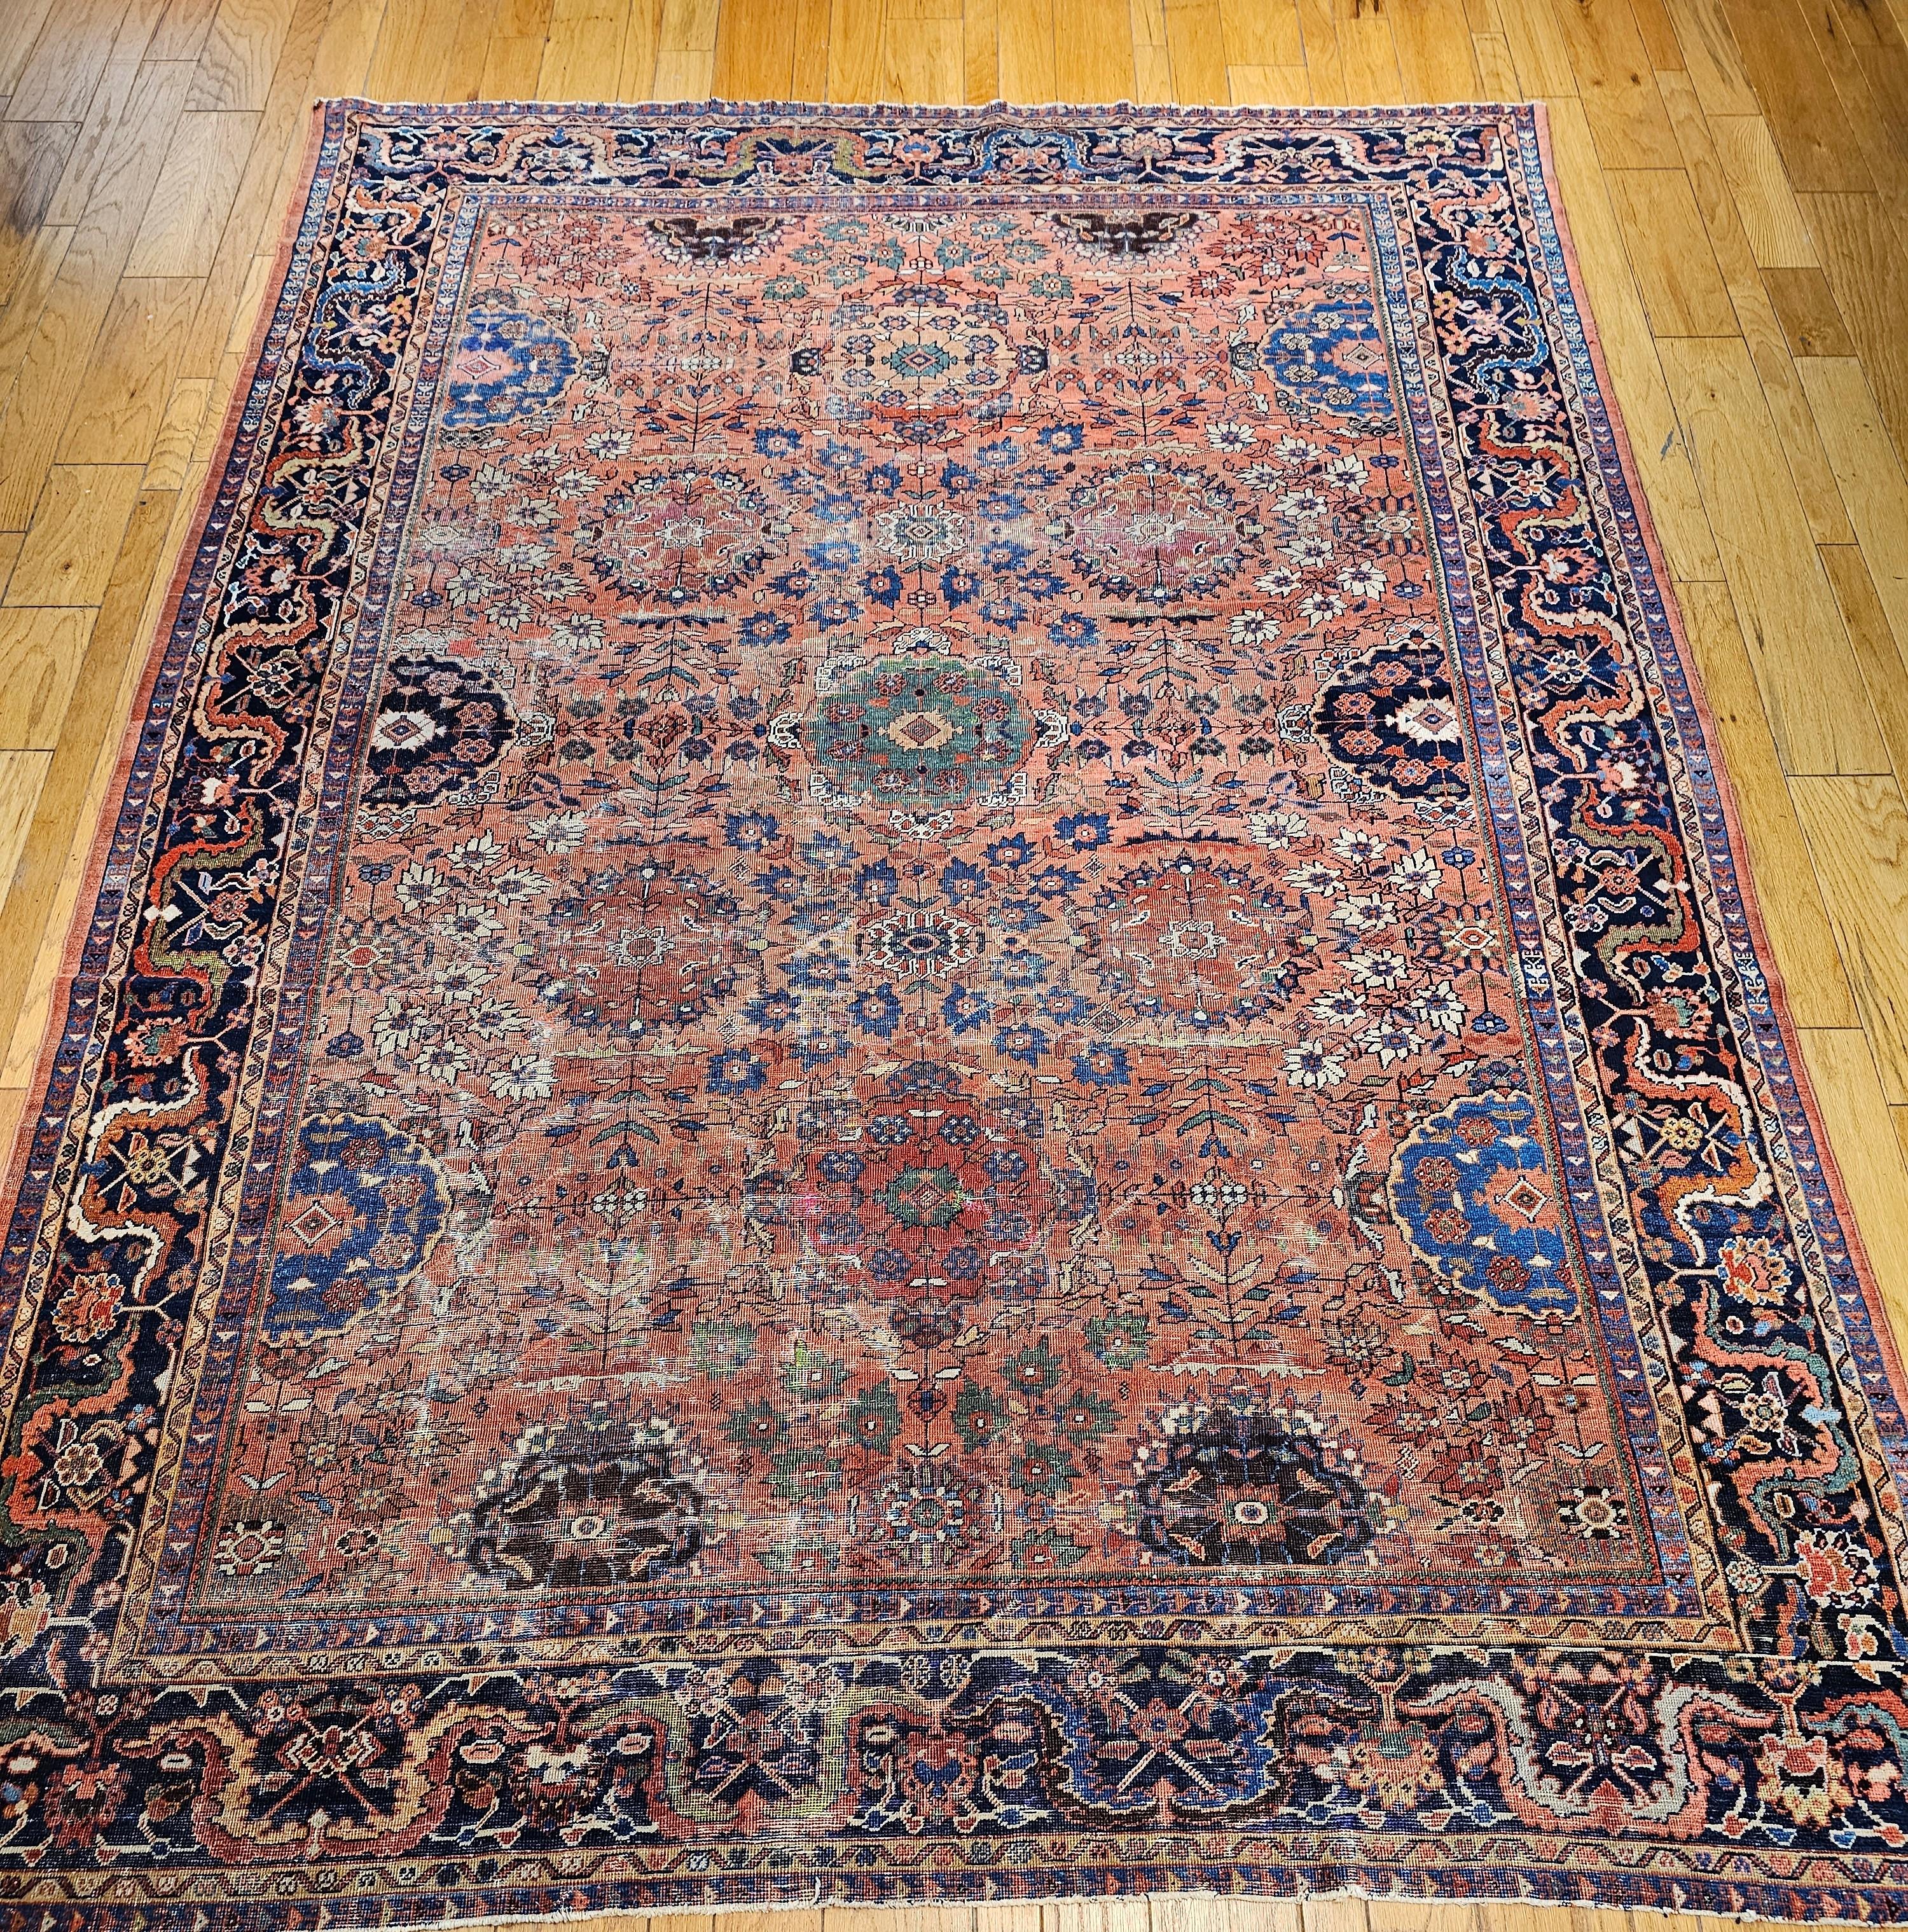 Vintage Persian Mahal Sultanabad Room Size Rug in Brick Red, Navy Blue 12